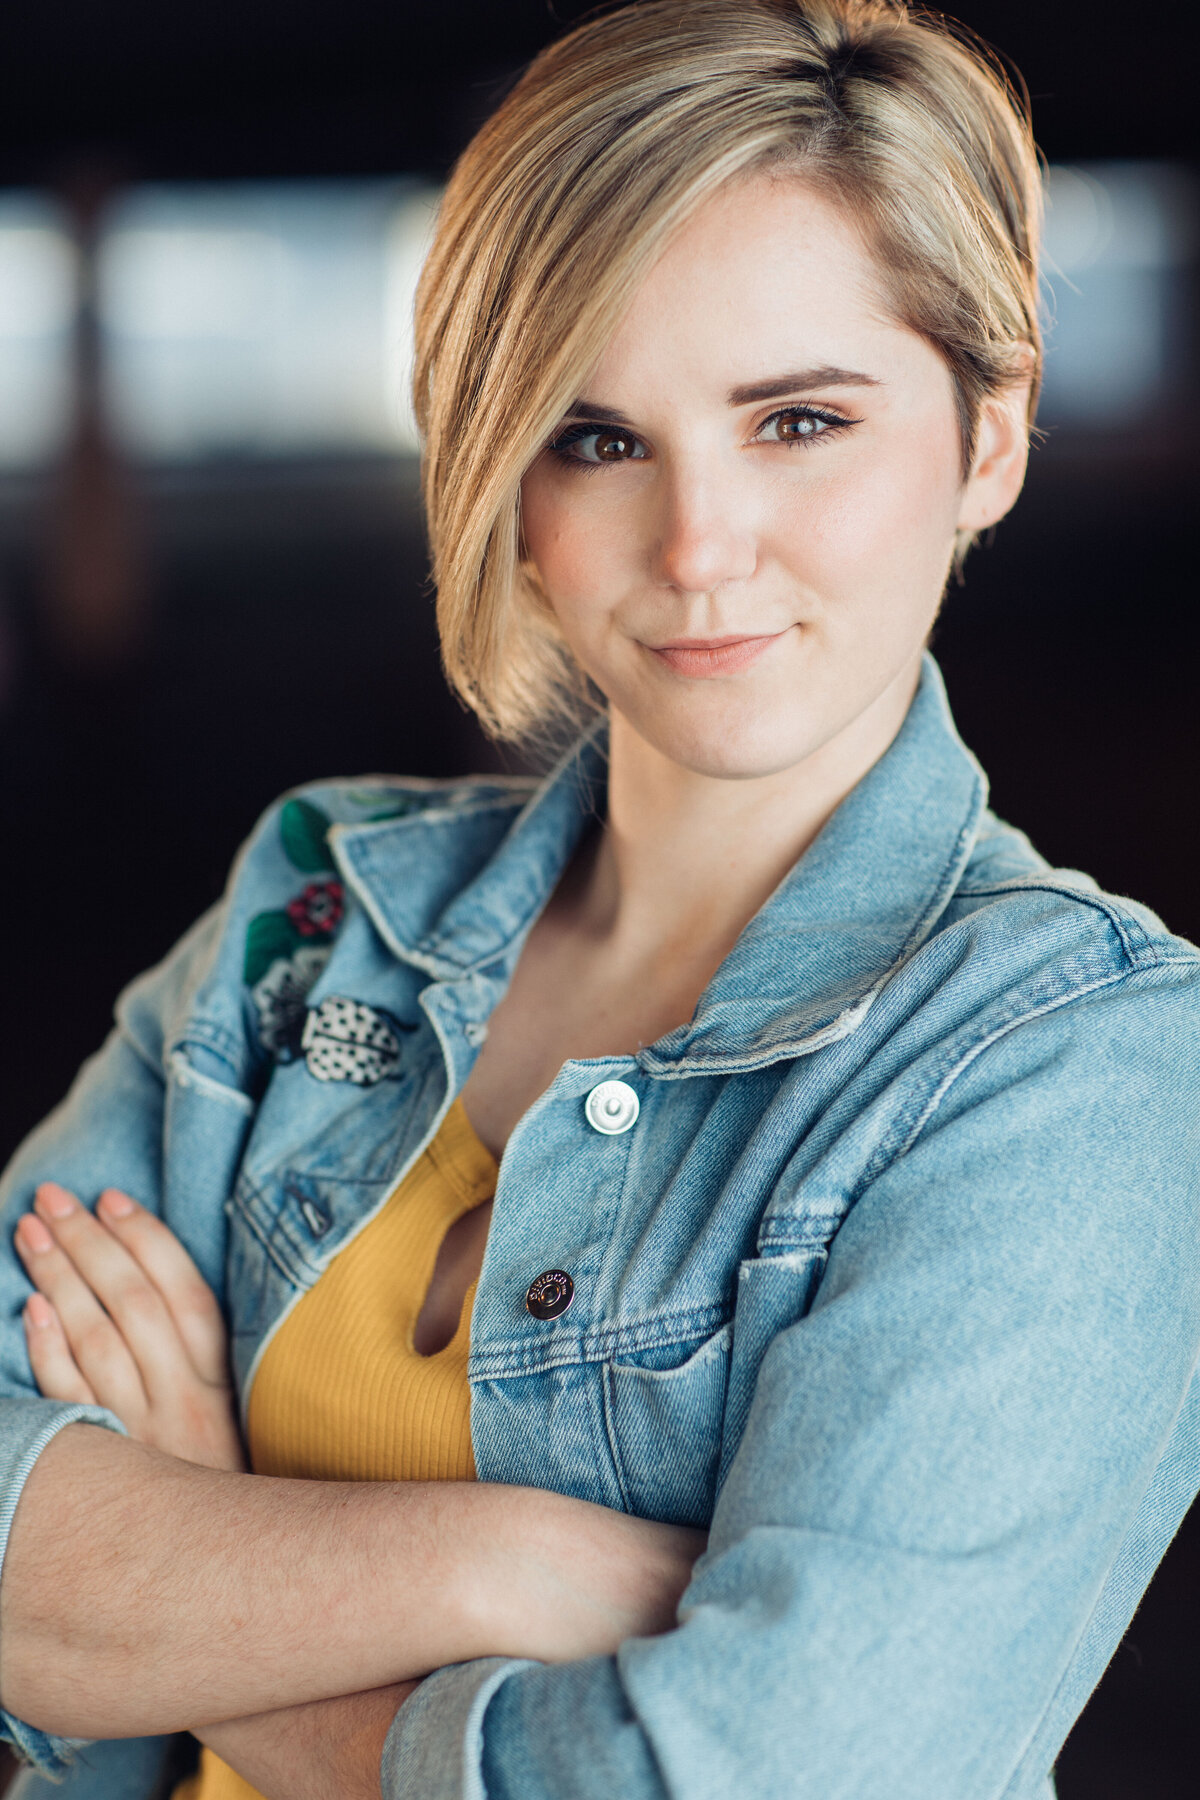 Headshot Photograph Of Young Woman In Outer Faded Blue Denim Jacket And Inner Yellow Shirt Los Angeles